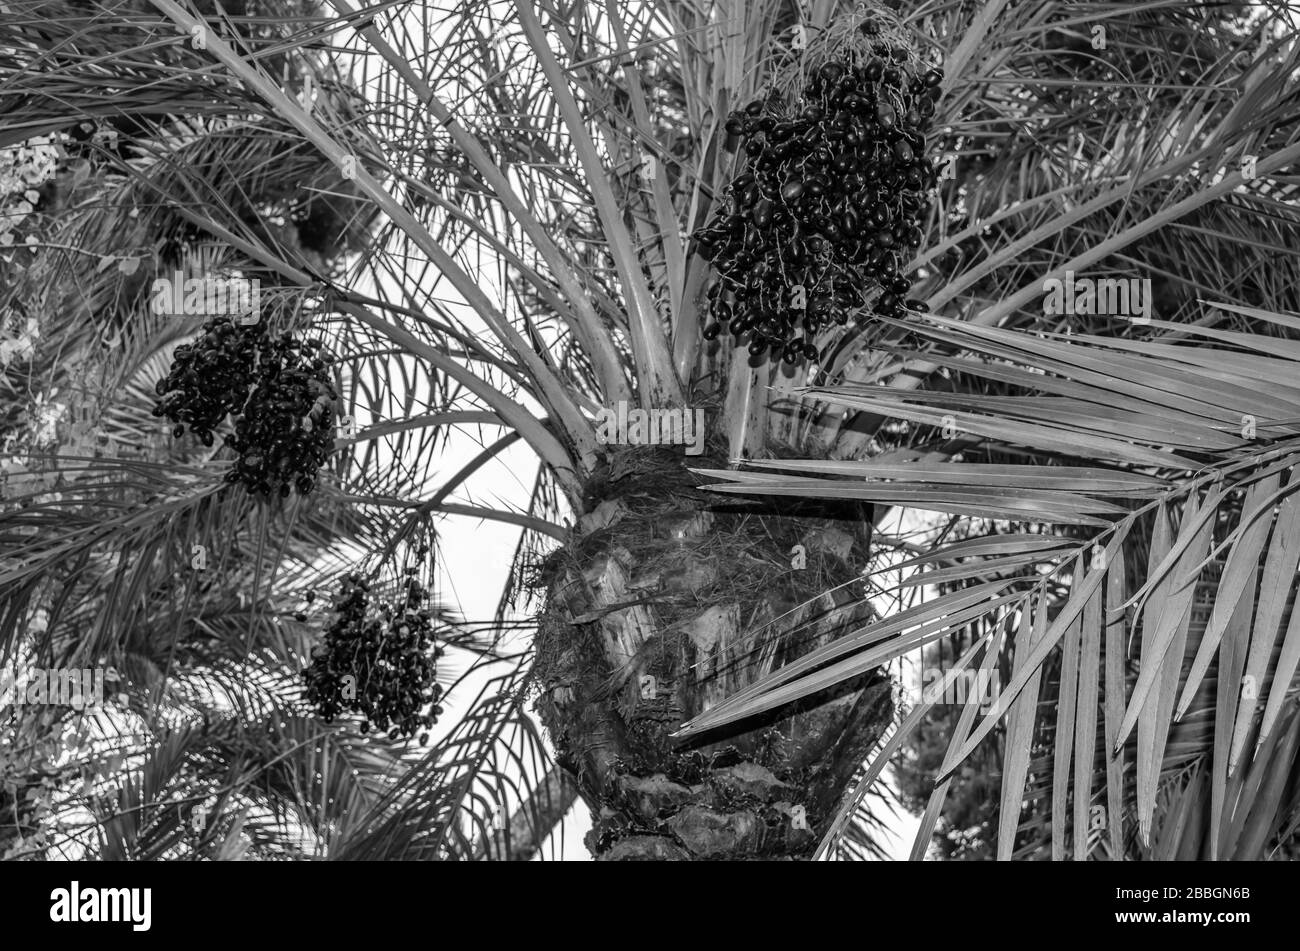 Detail of a date palm tree with ripped fruits, black and white image Stock Photo